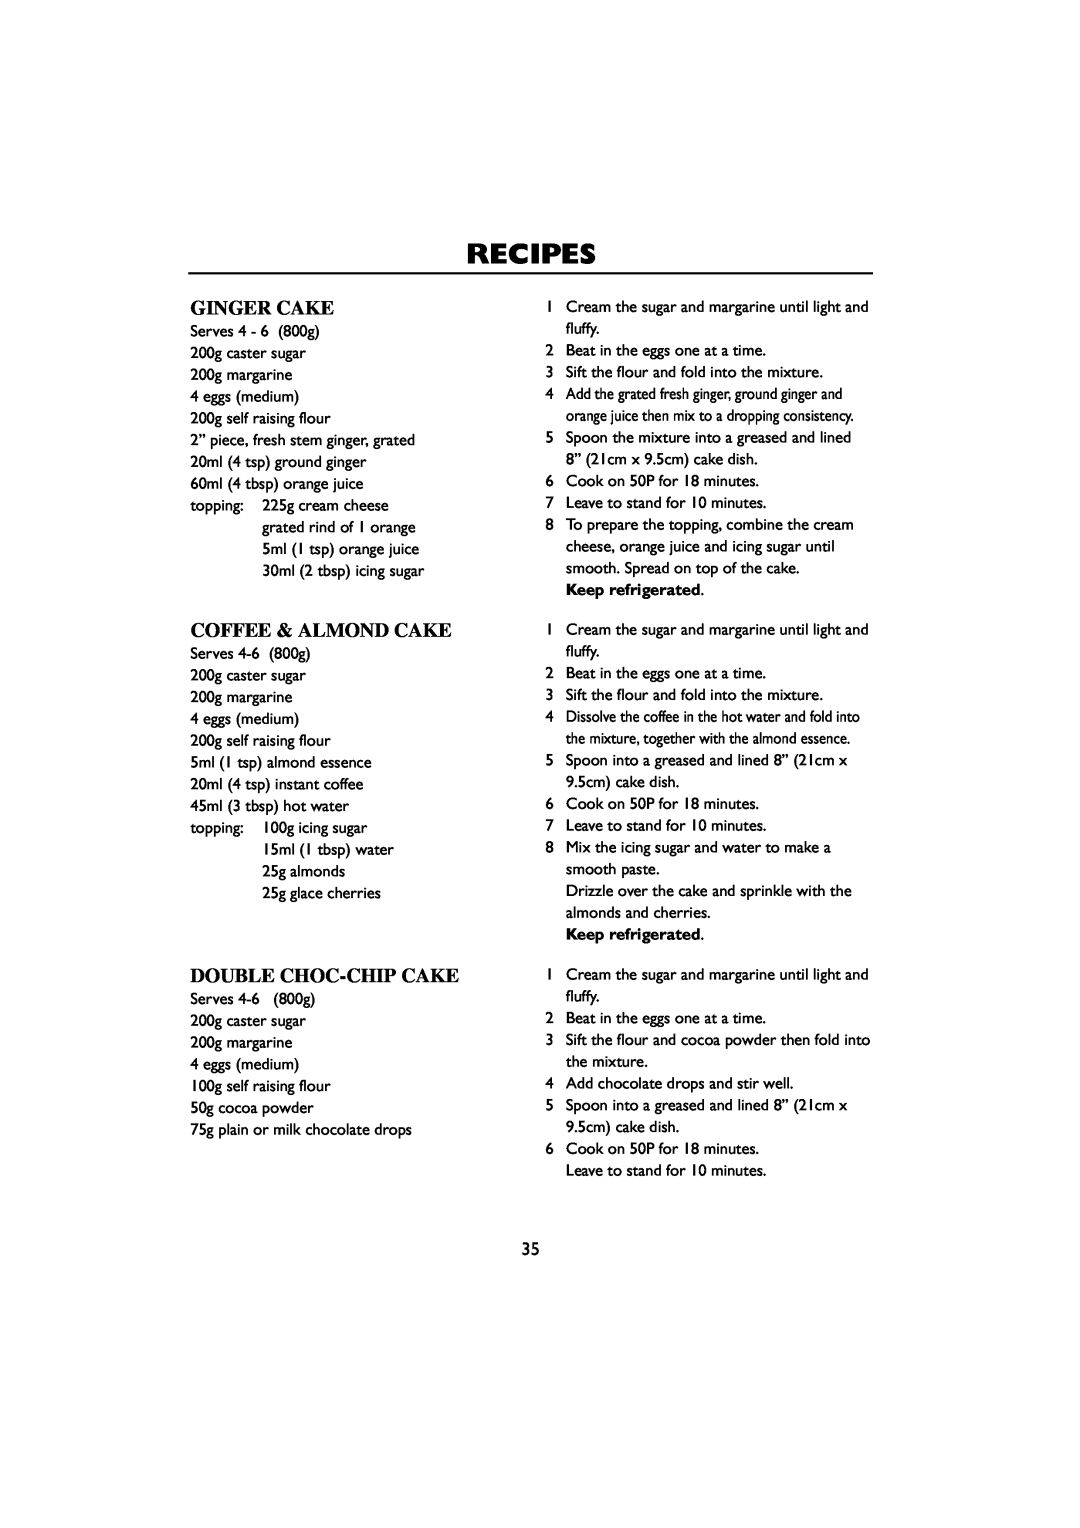 Sharp R-259 operation manual Ginger Cake, Coffee & Almond Cake, Double Choc-Chip Cake, Keep refrigerated, Recipes 